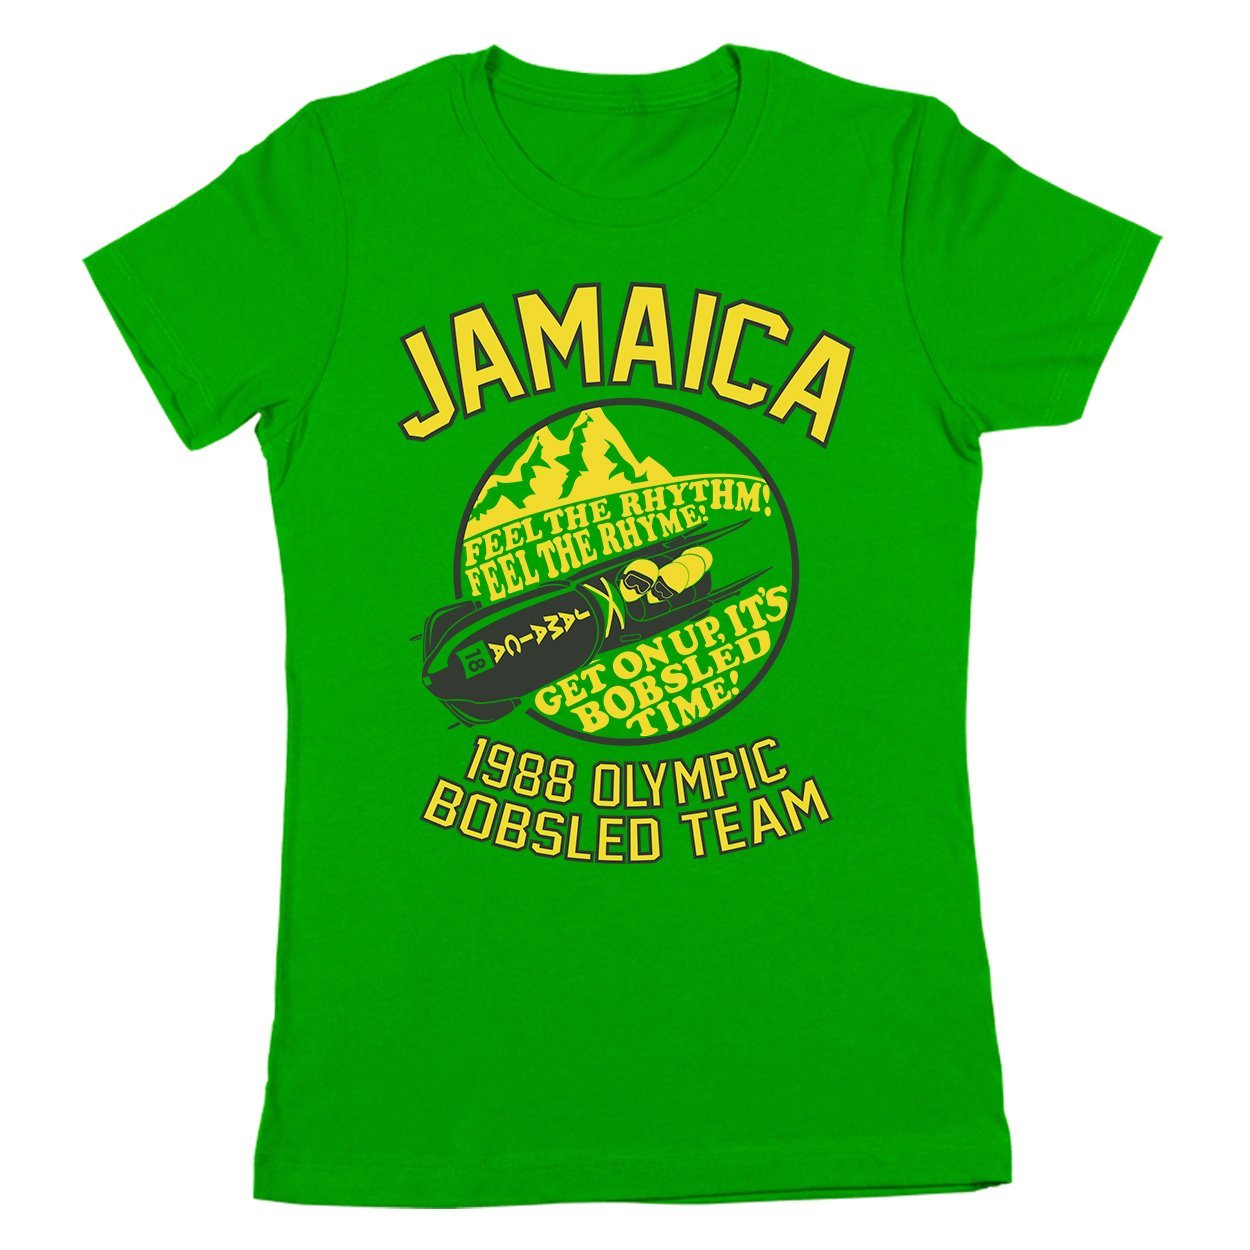 Jamaica 1988 Olympic Bobsled Team Women's Fit T-Shirt